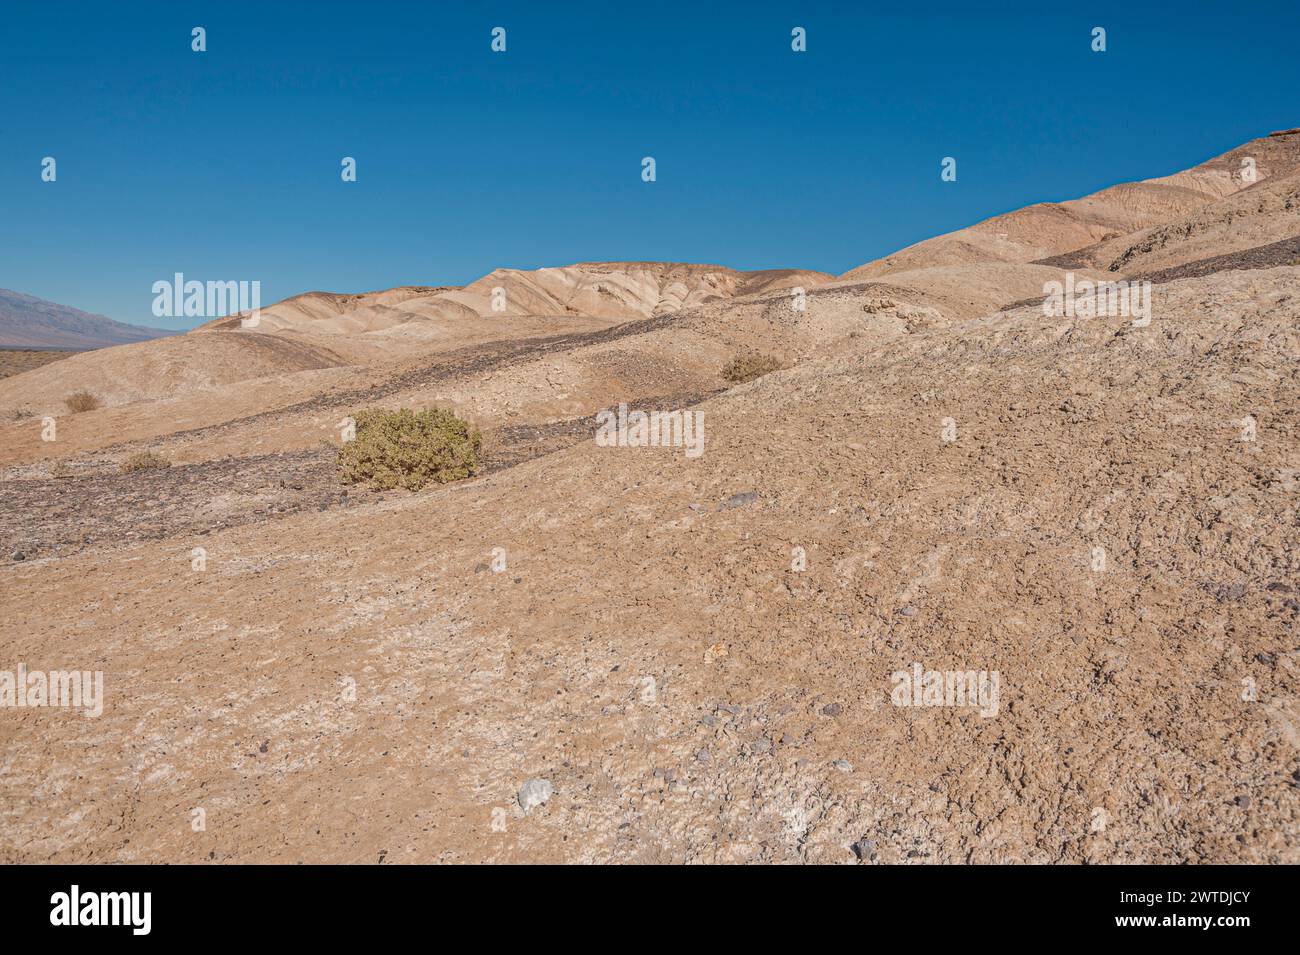 Death Valley Arroyo oder Dry River Bed, USA Stockfoto